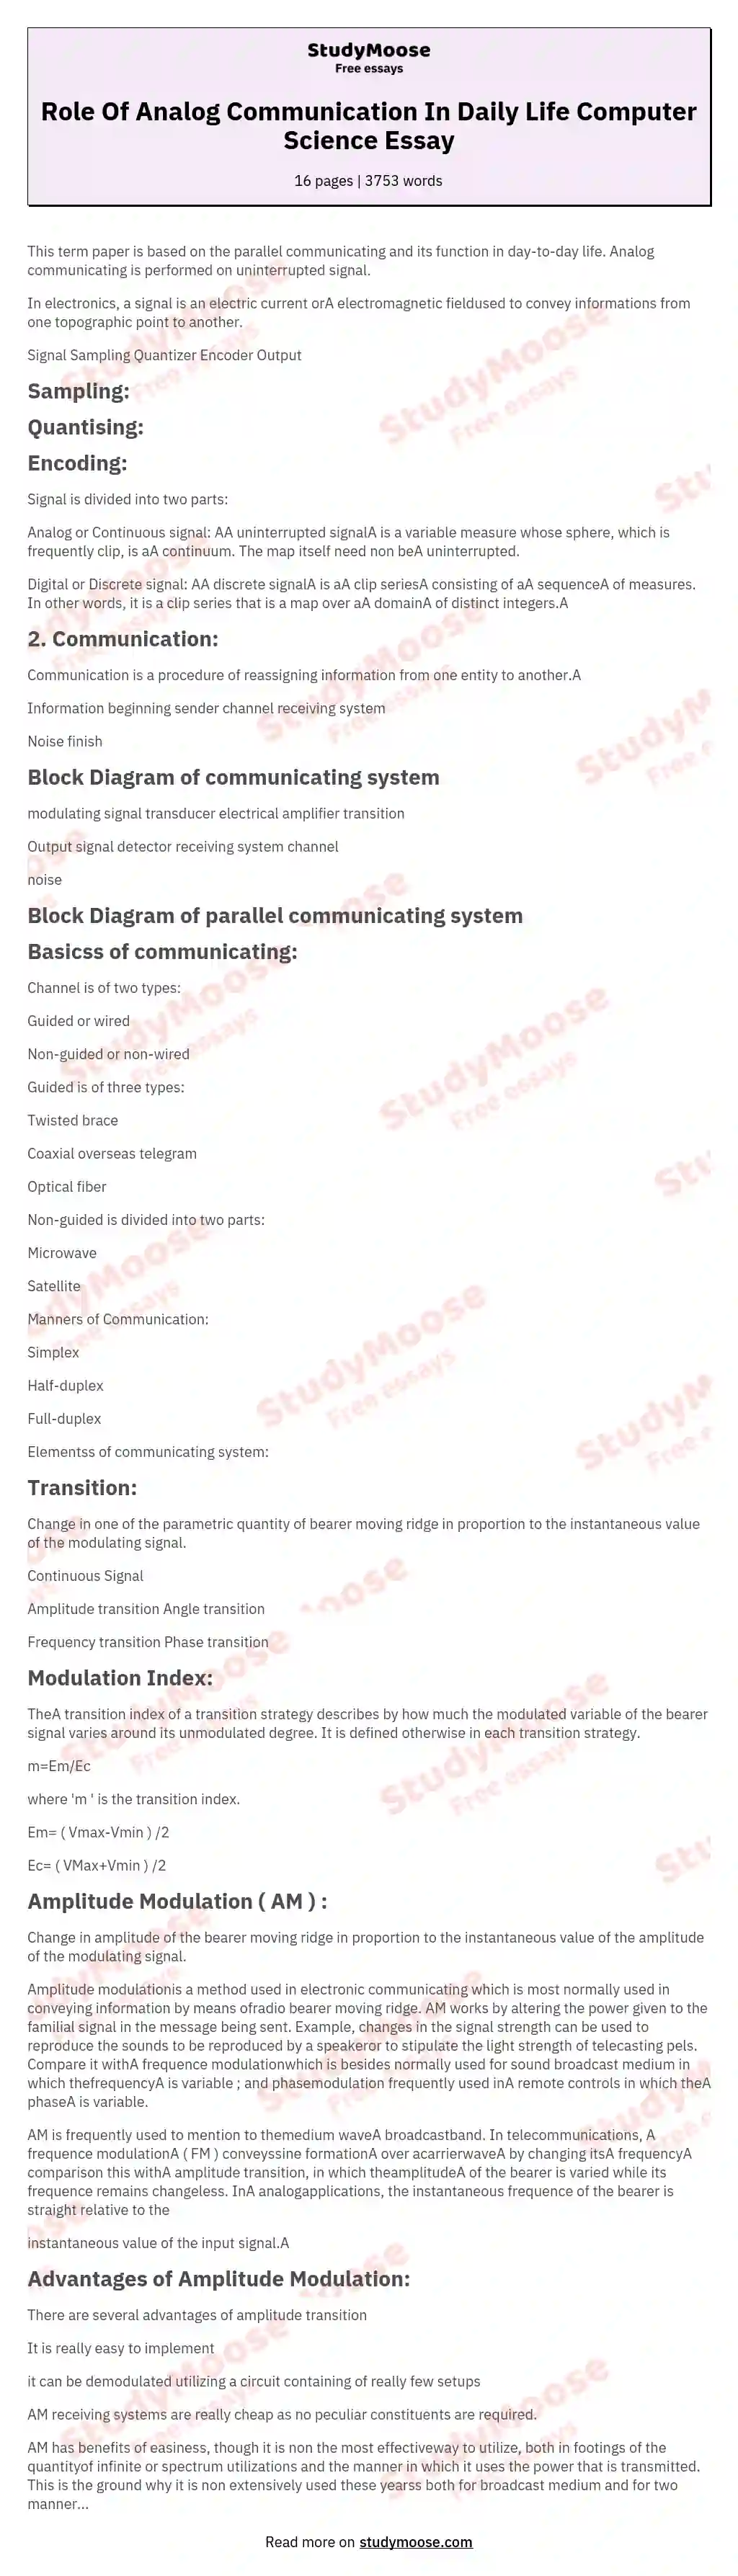 Role Of Analog Communication In Daily Life Computer Science Essay essay